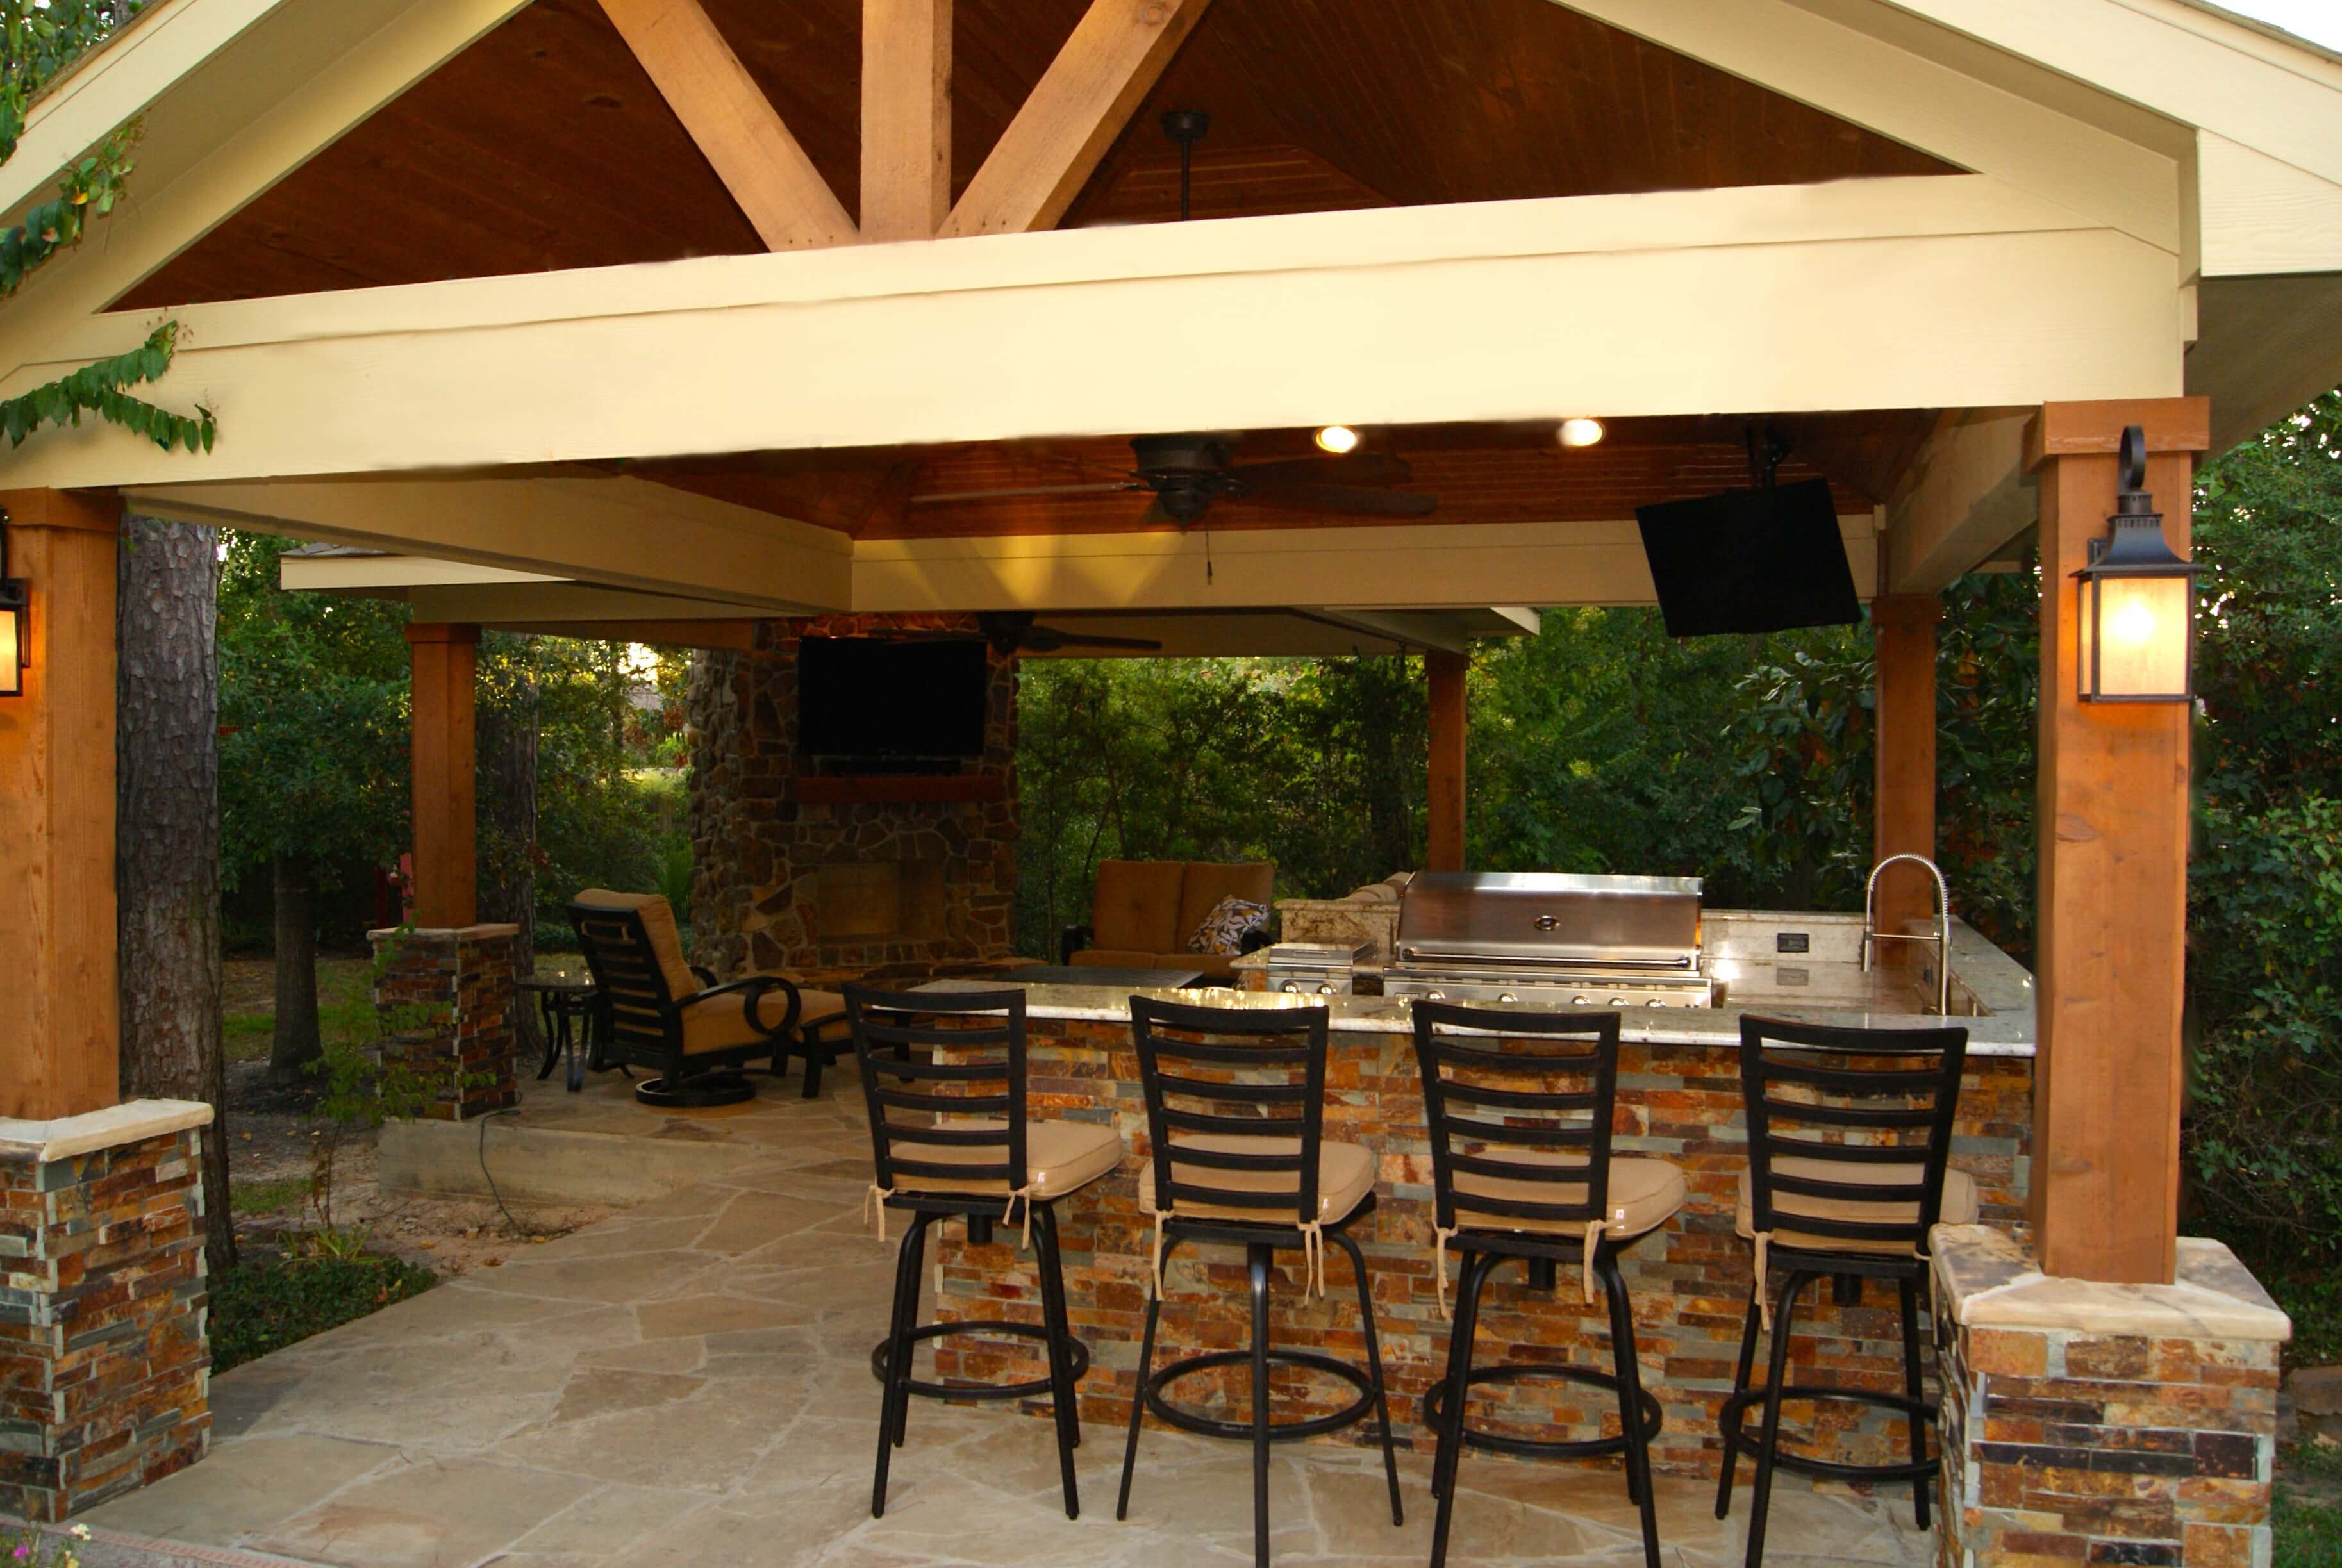 Freestanding Patio Cover With Kitchen & Fireplace In The Woodlands